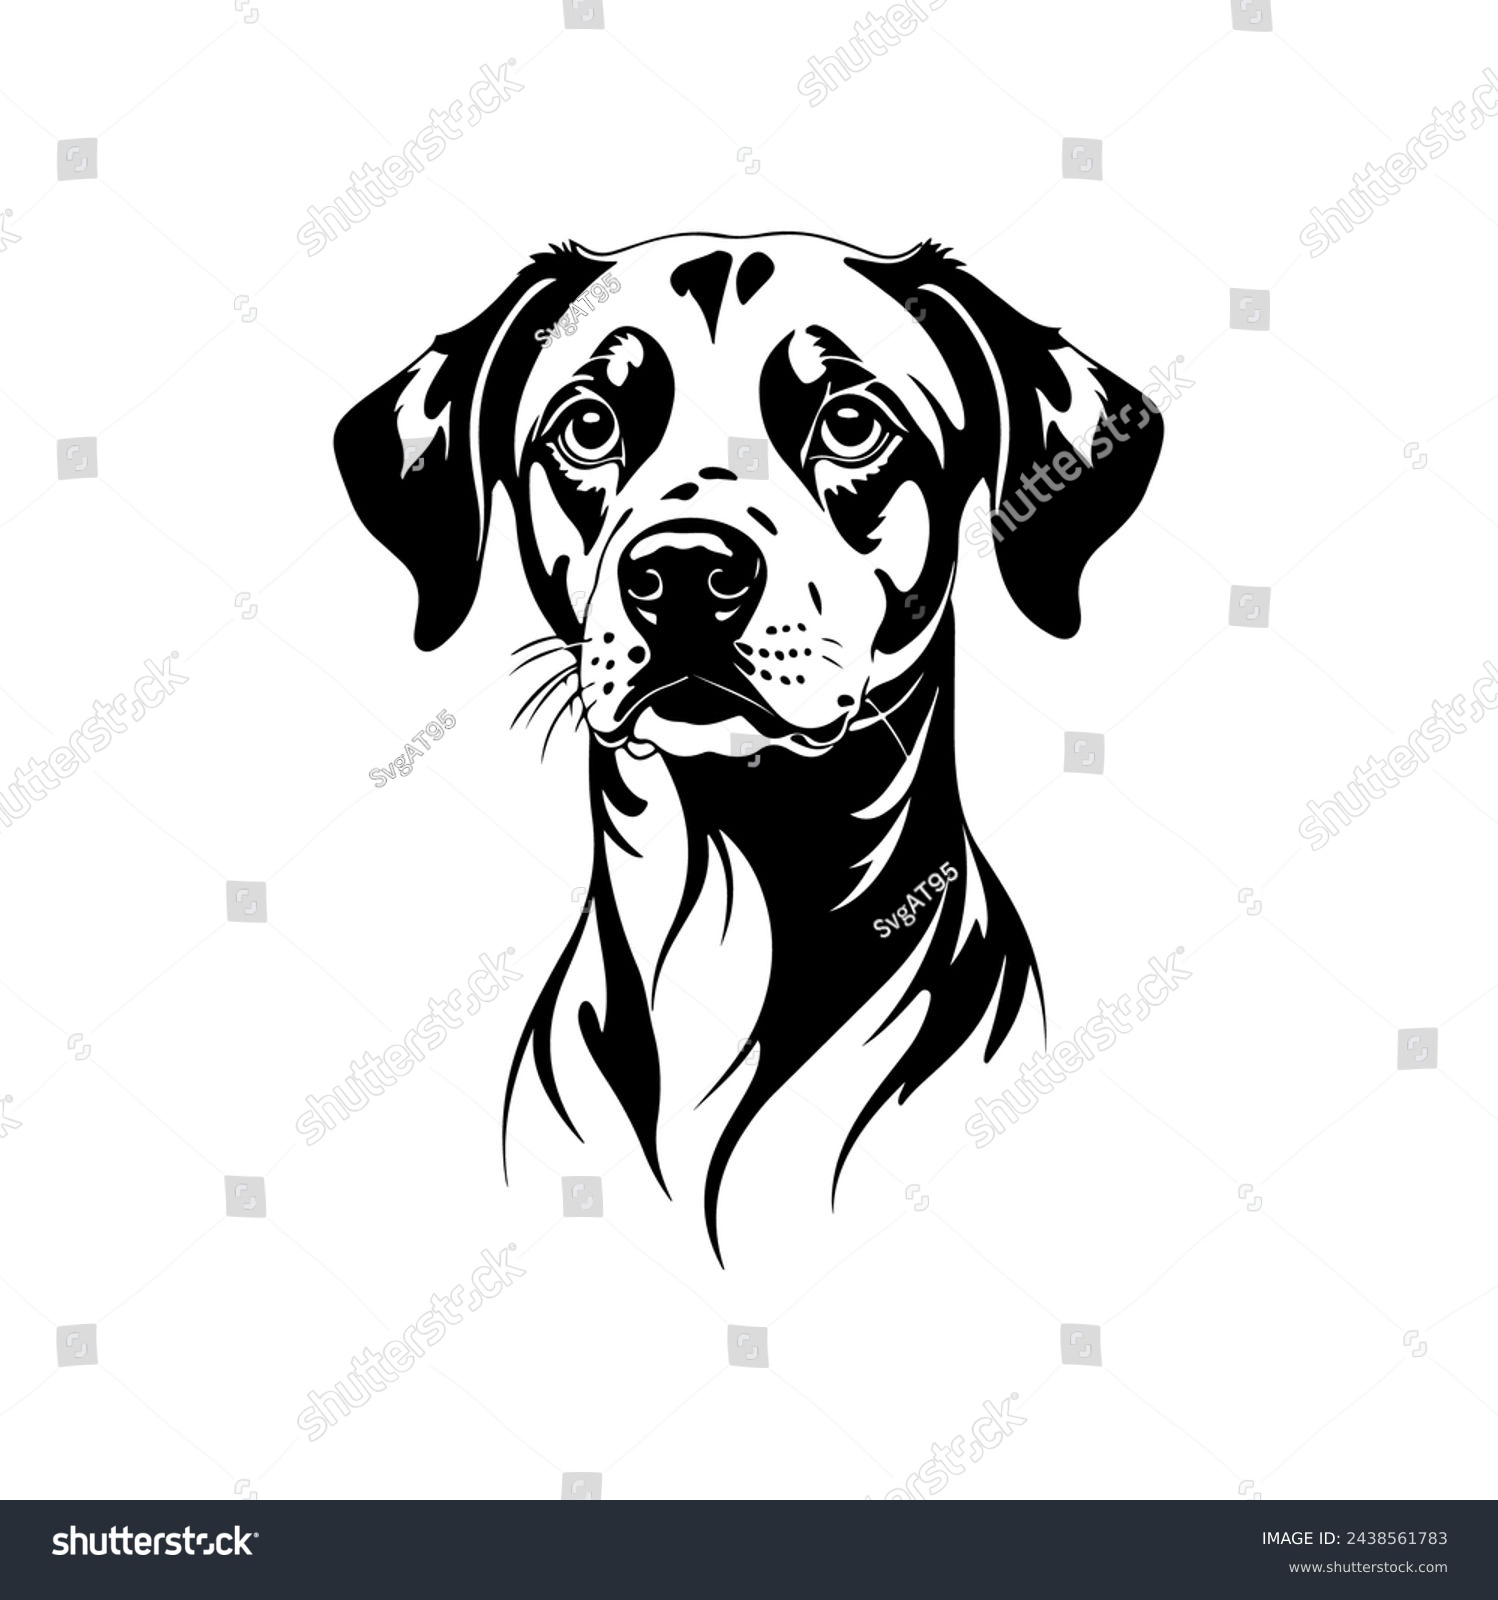 SVG of Portrait of a Dalmatian Dog Vector isolated on white background, Dog Silhouettes. svg